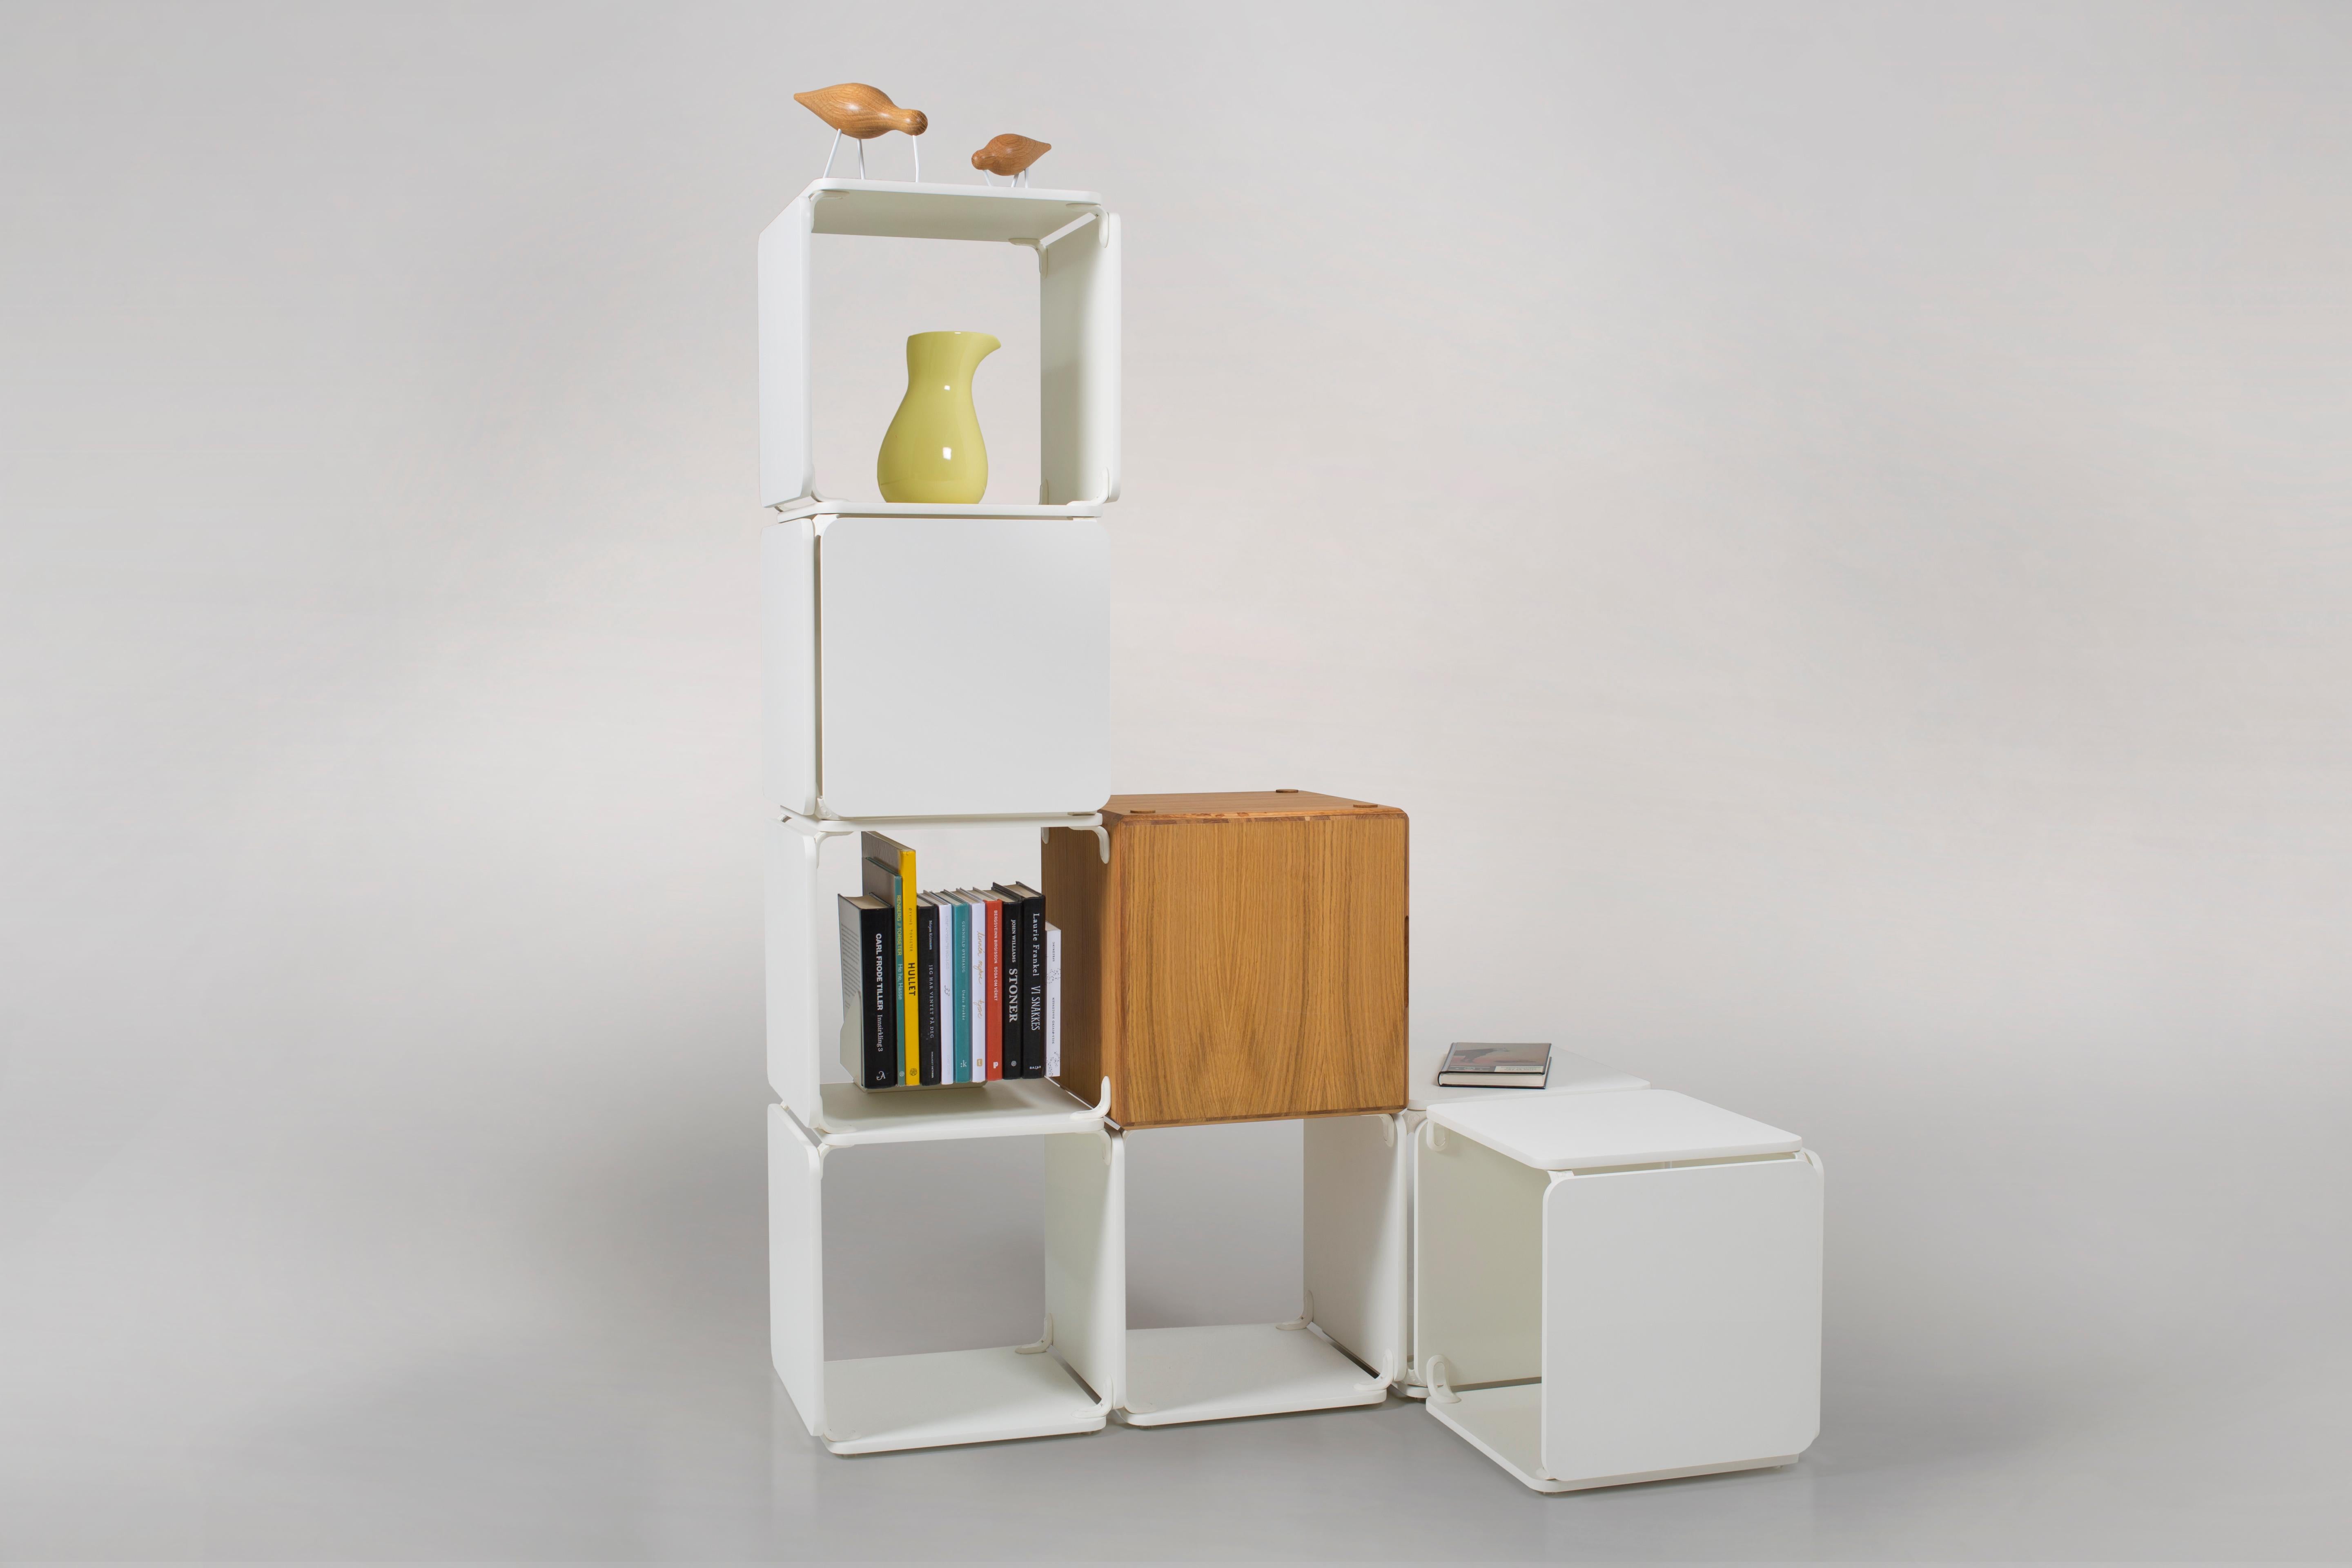 *Only sold in a full set (6 white cabinets & 1 wooden).

A modular shelving unit with patented clips. Three dimensional use for limitless creative possibilities, uses range from furniture, space dividers, structural features. Can be expanded,